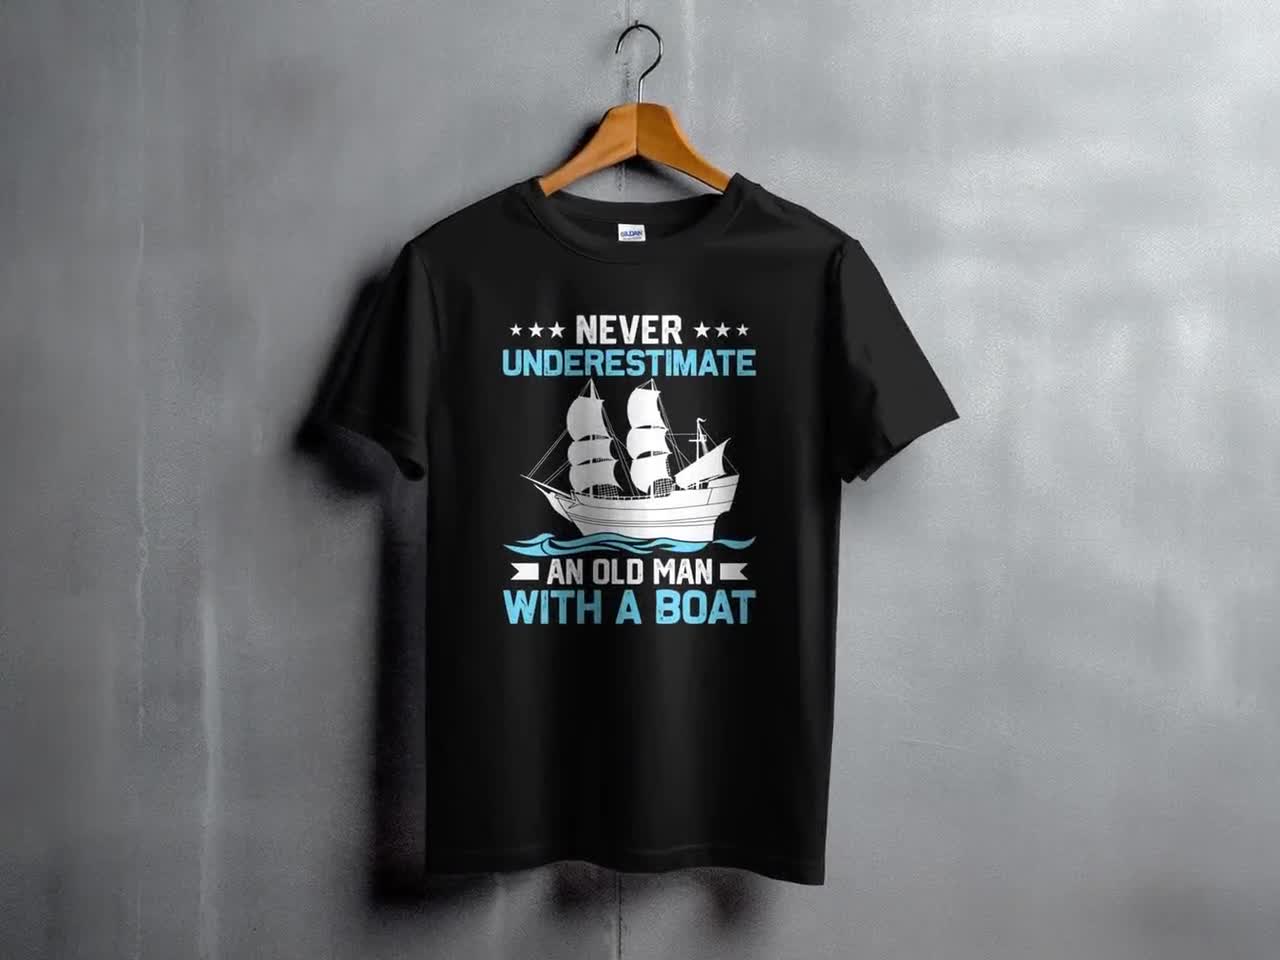 Never Underestimate An Old Man With A Sailing Boat Sailor T-Shirt